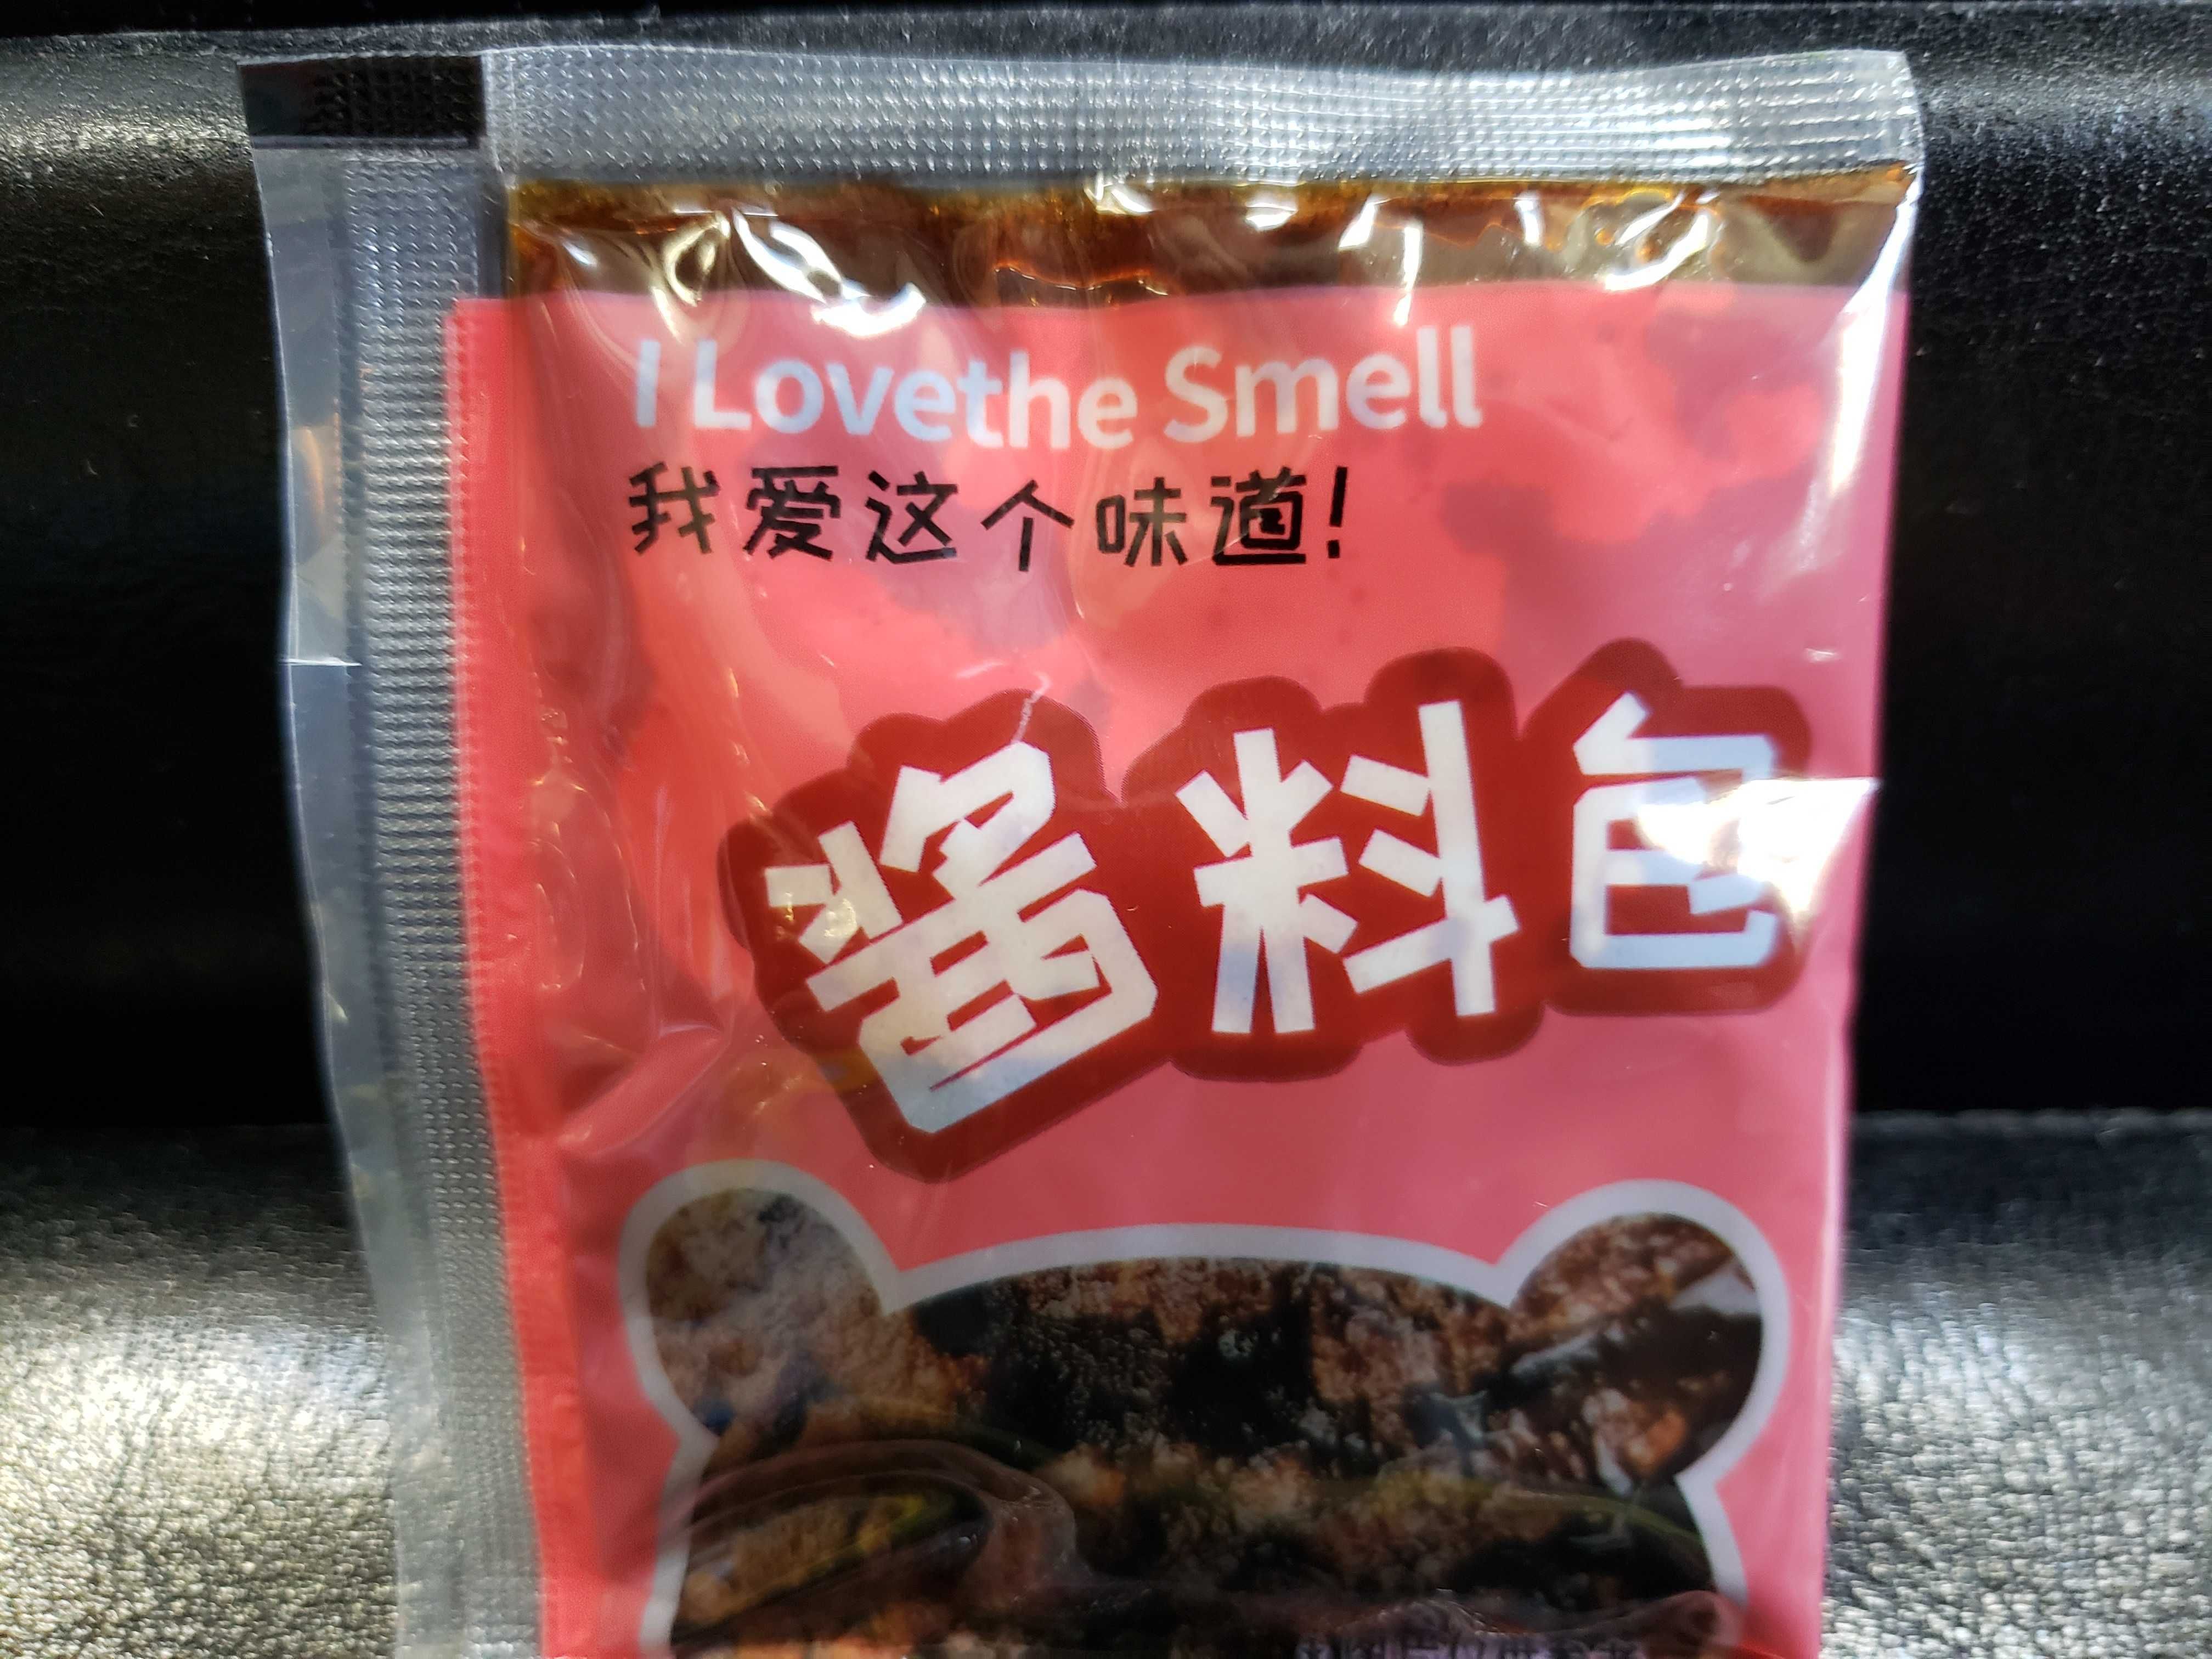 Photo of a package of snail noodles. 